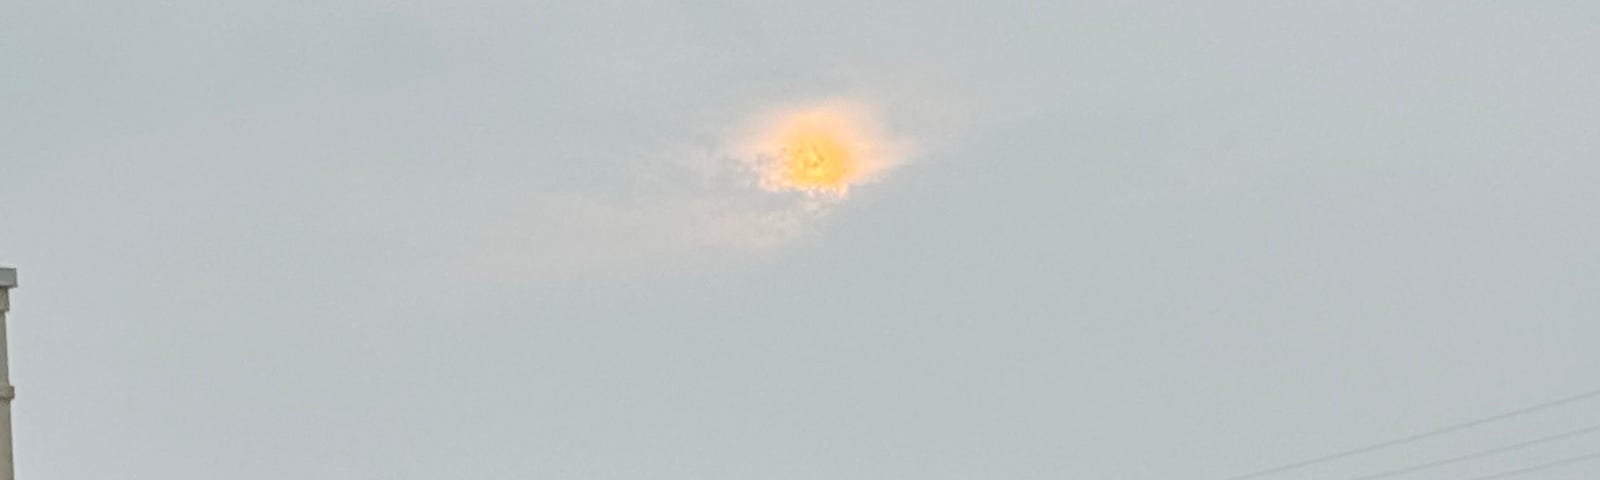 Photo of a faint sun peeking out from gray clouds.